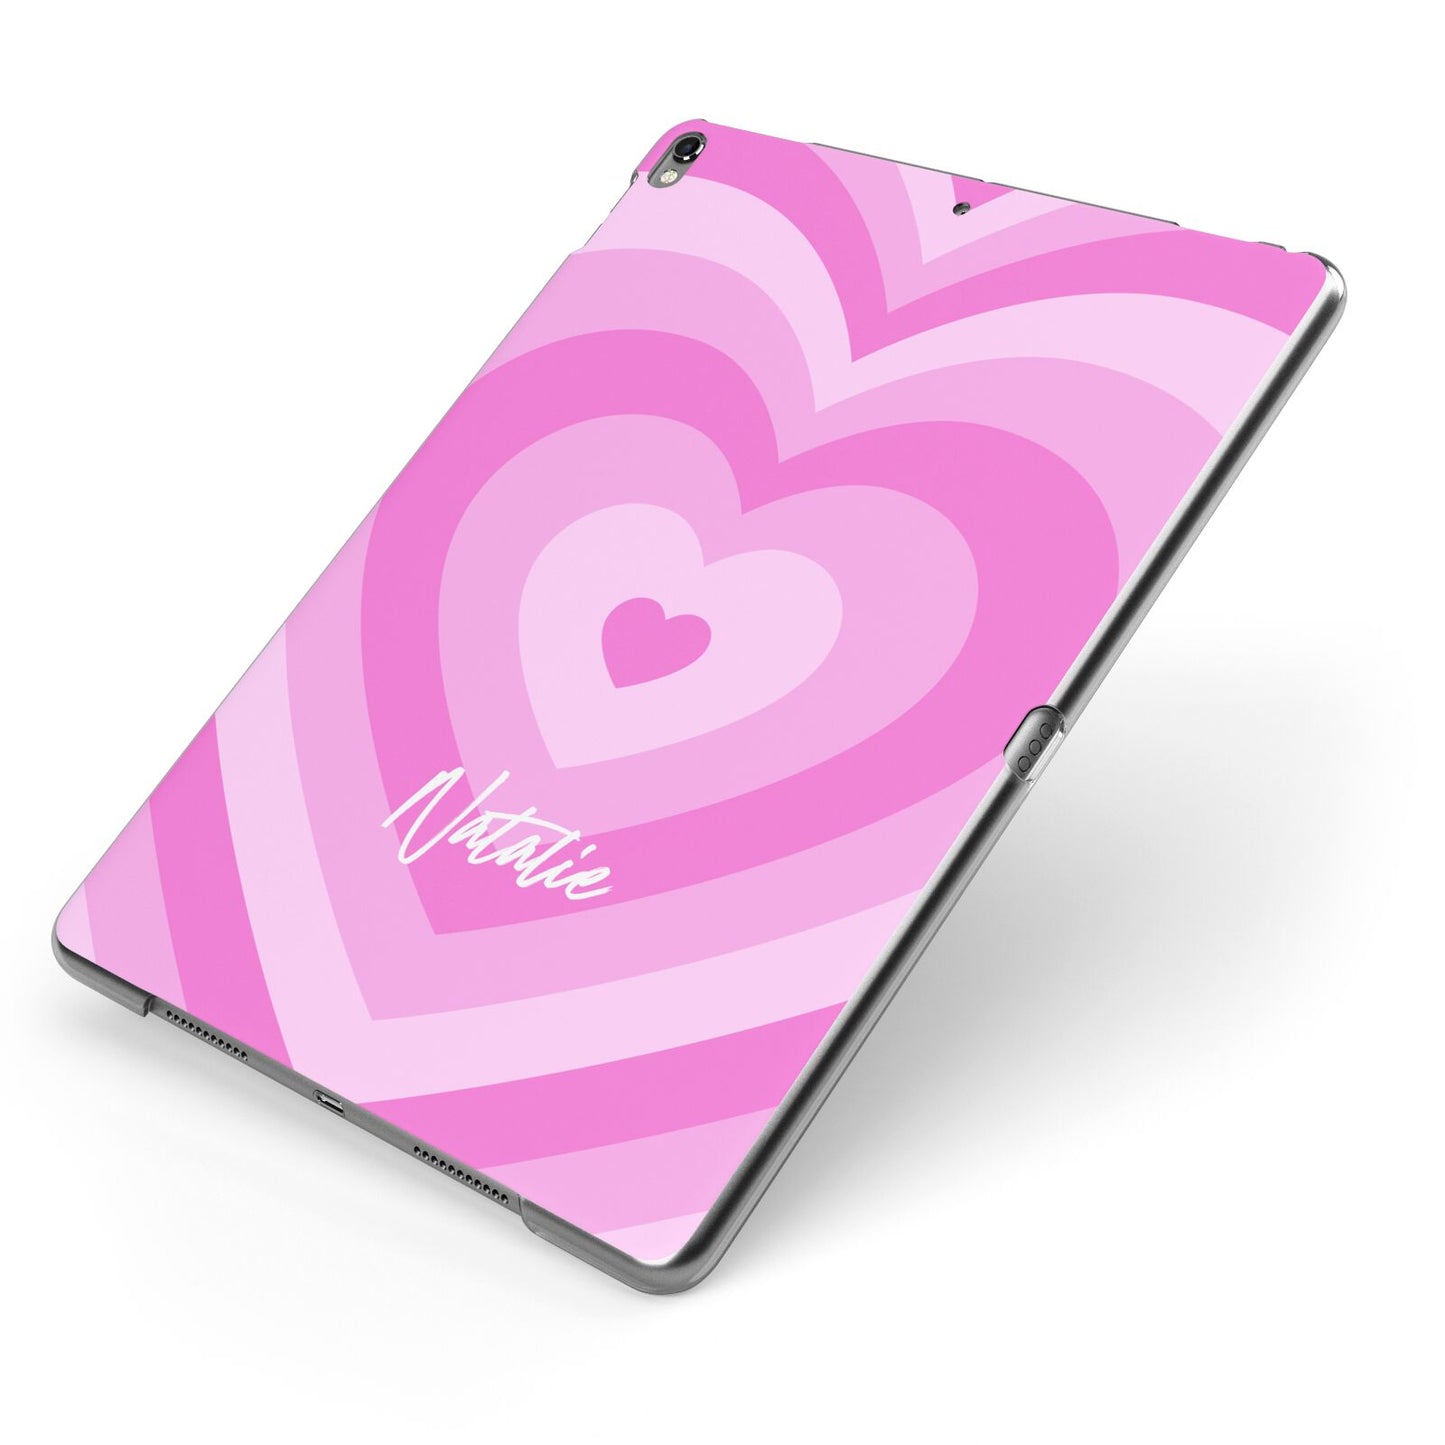 Personalised Pink Heart Apple iPad Case on Grey iPad Side View